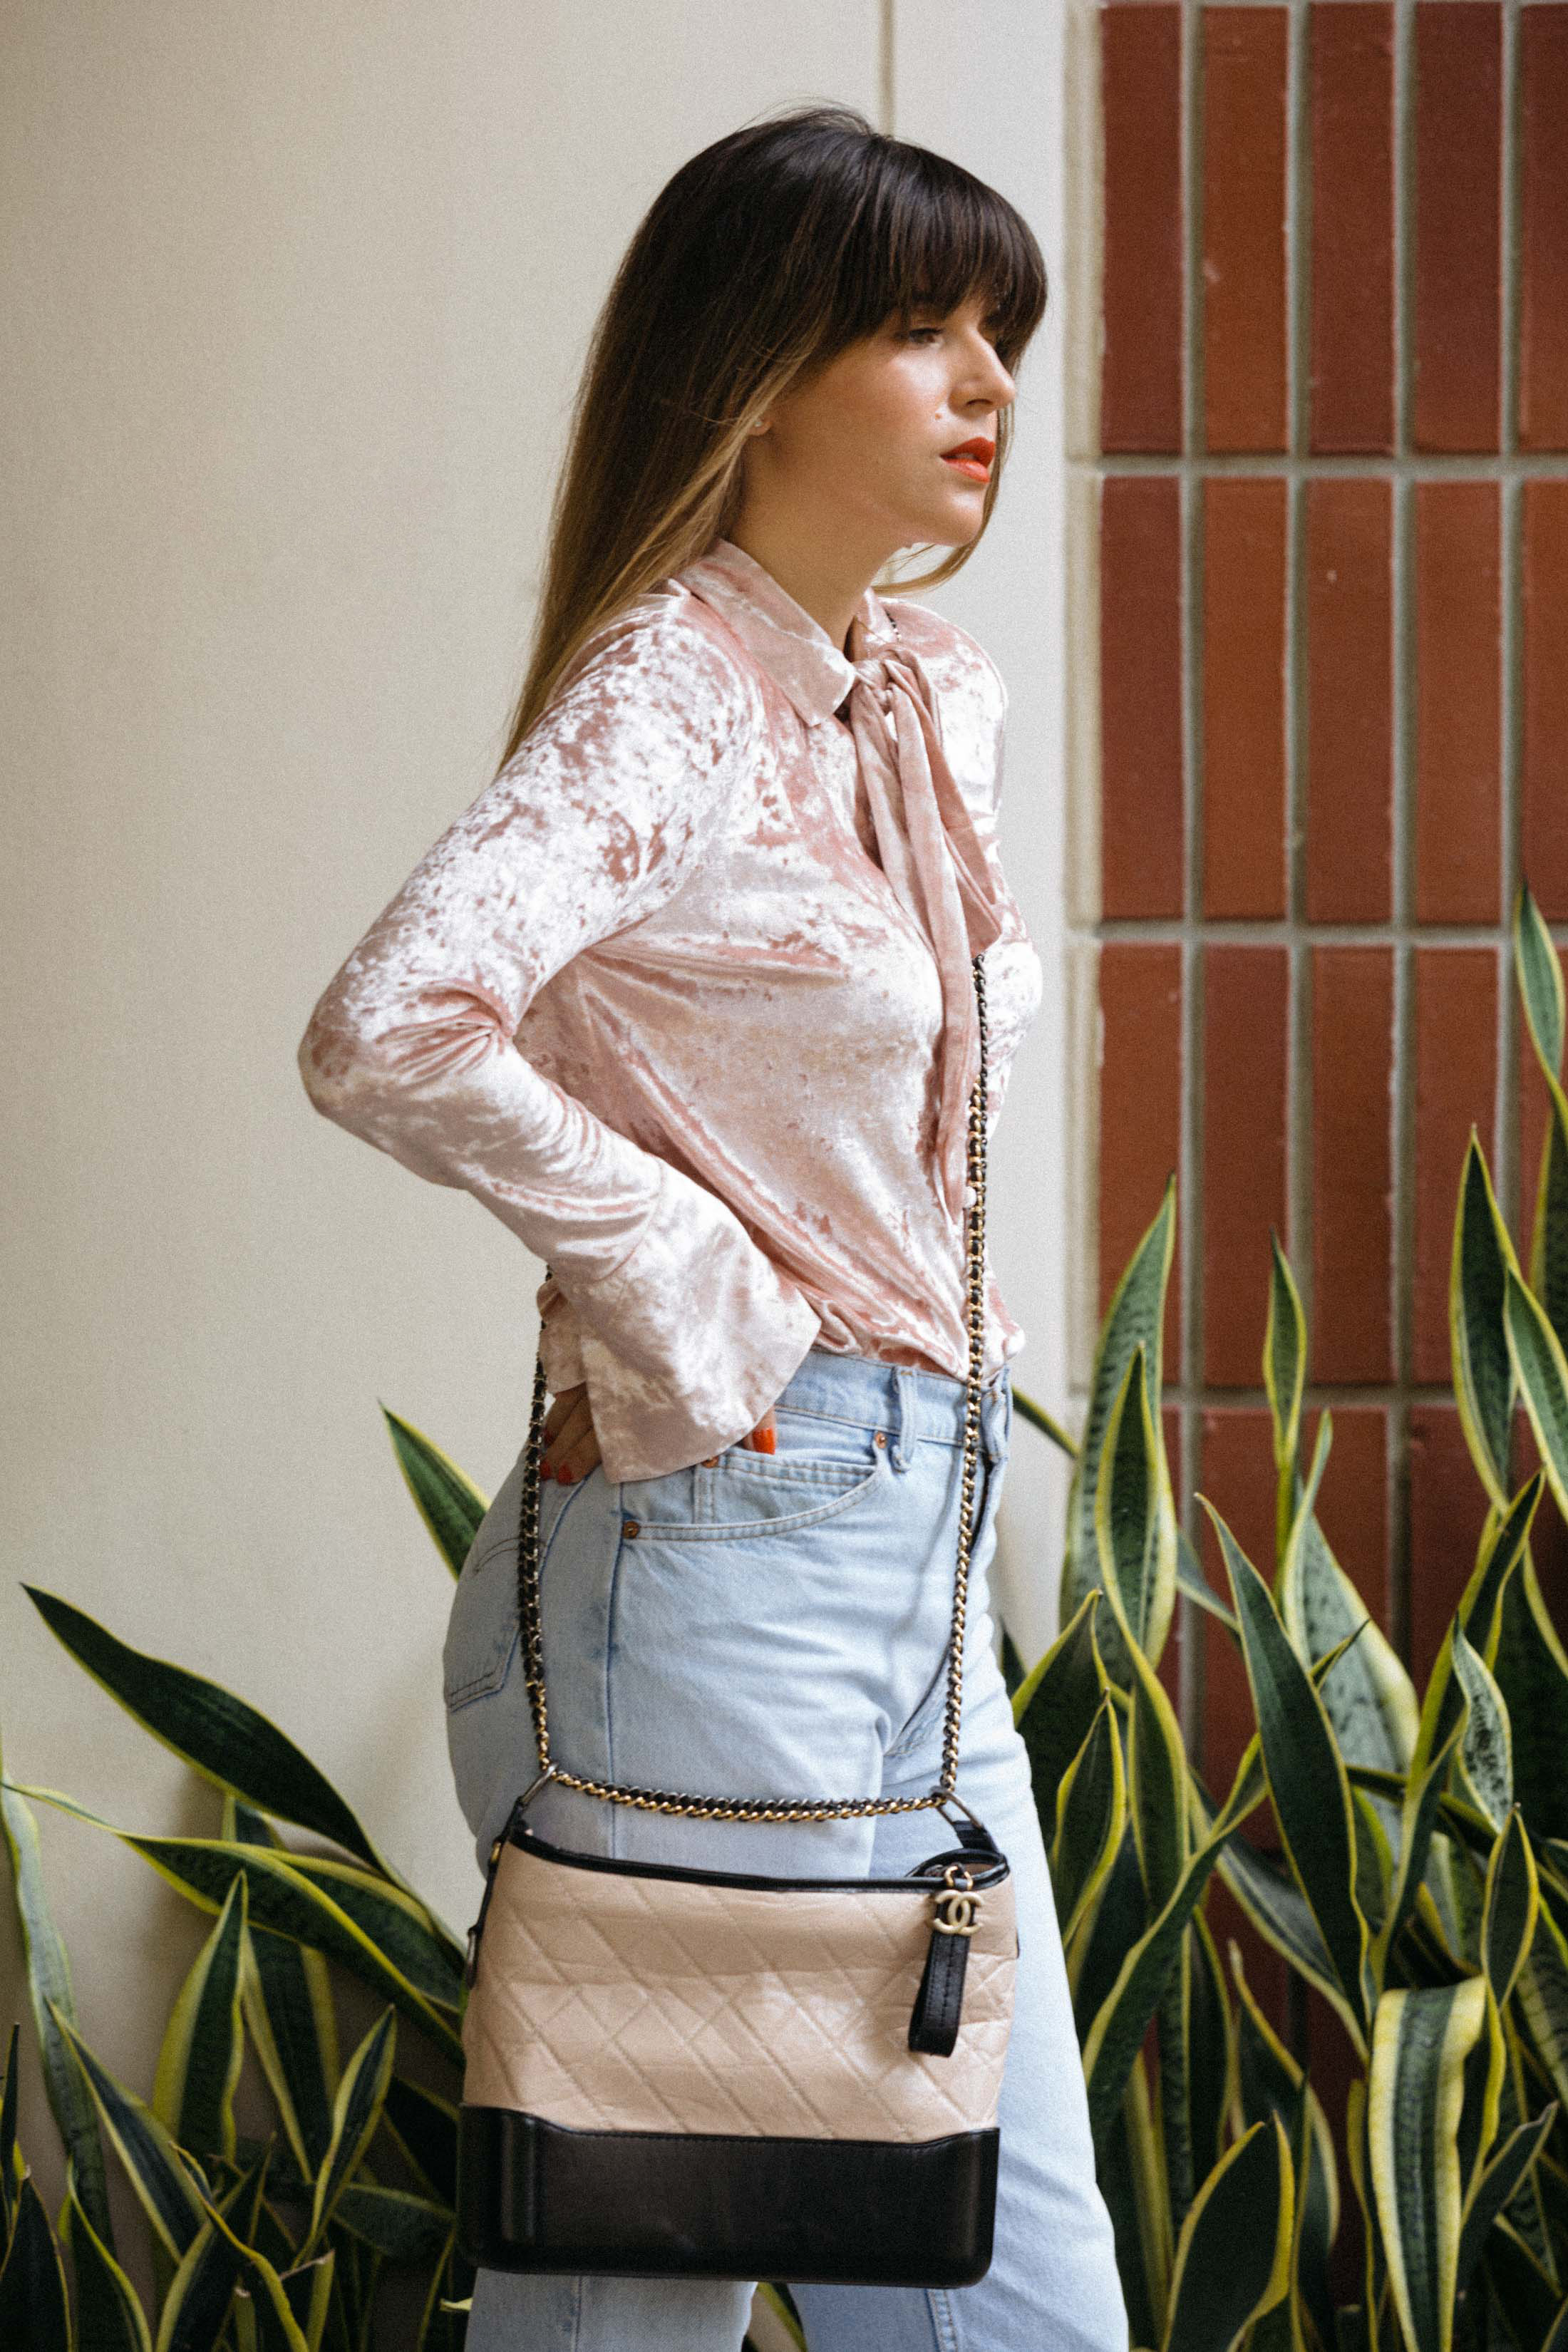 Maristella wears a pink velvet blouse, high rise jeans and Chanel cross body bag